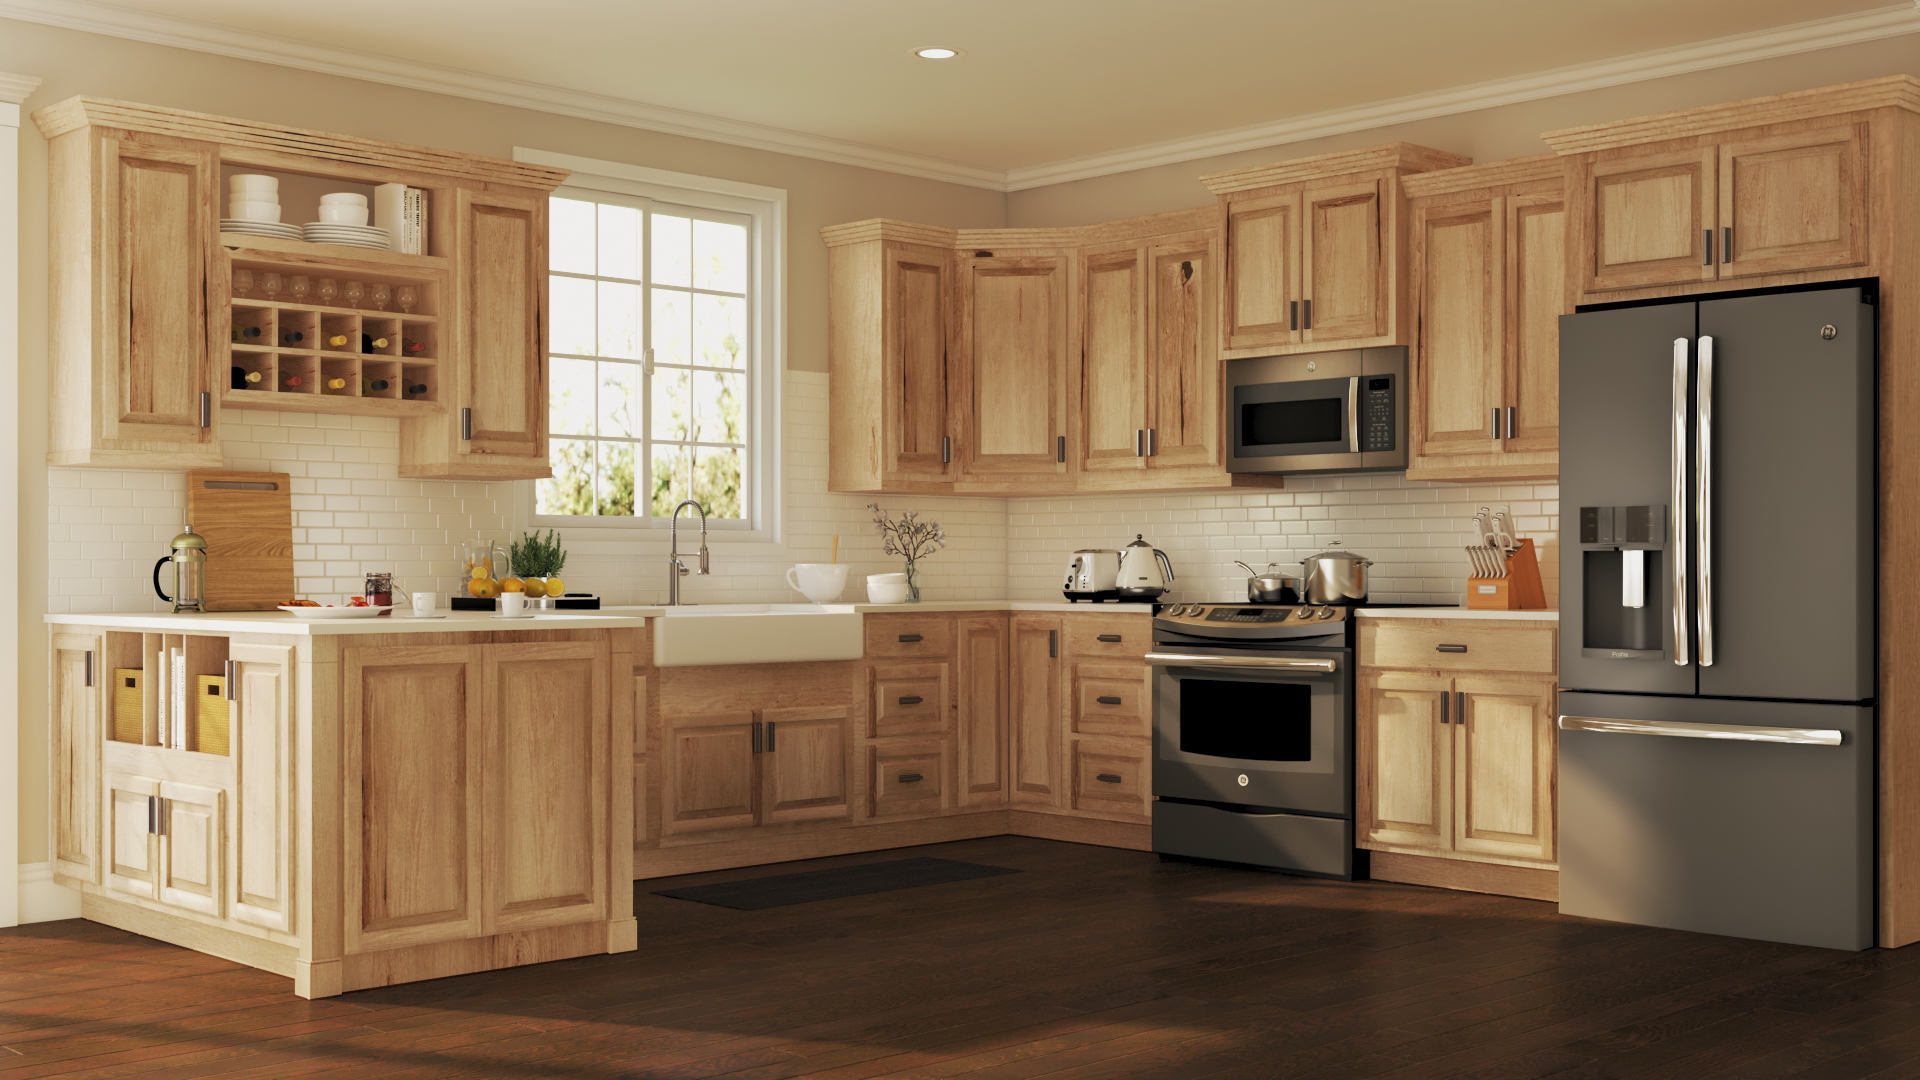 Hampton Wall Kitchen Cabinets In Natural Hickory Kitchen The